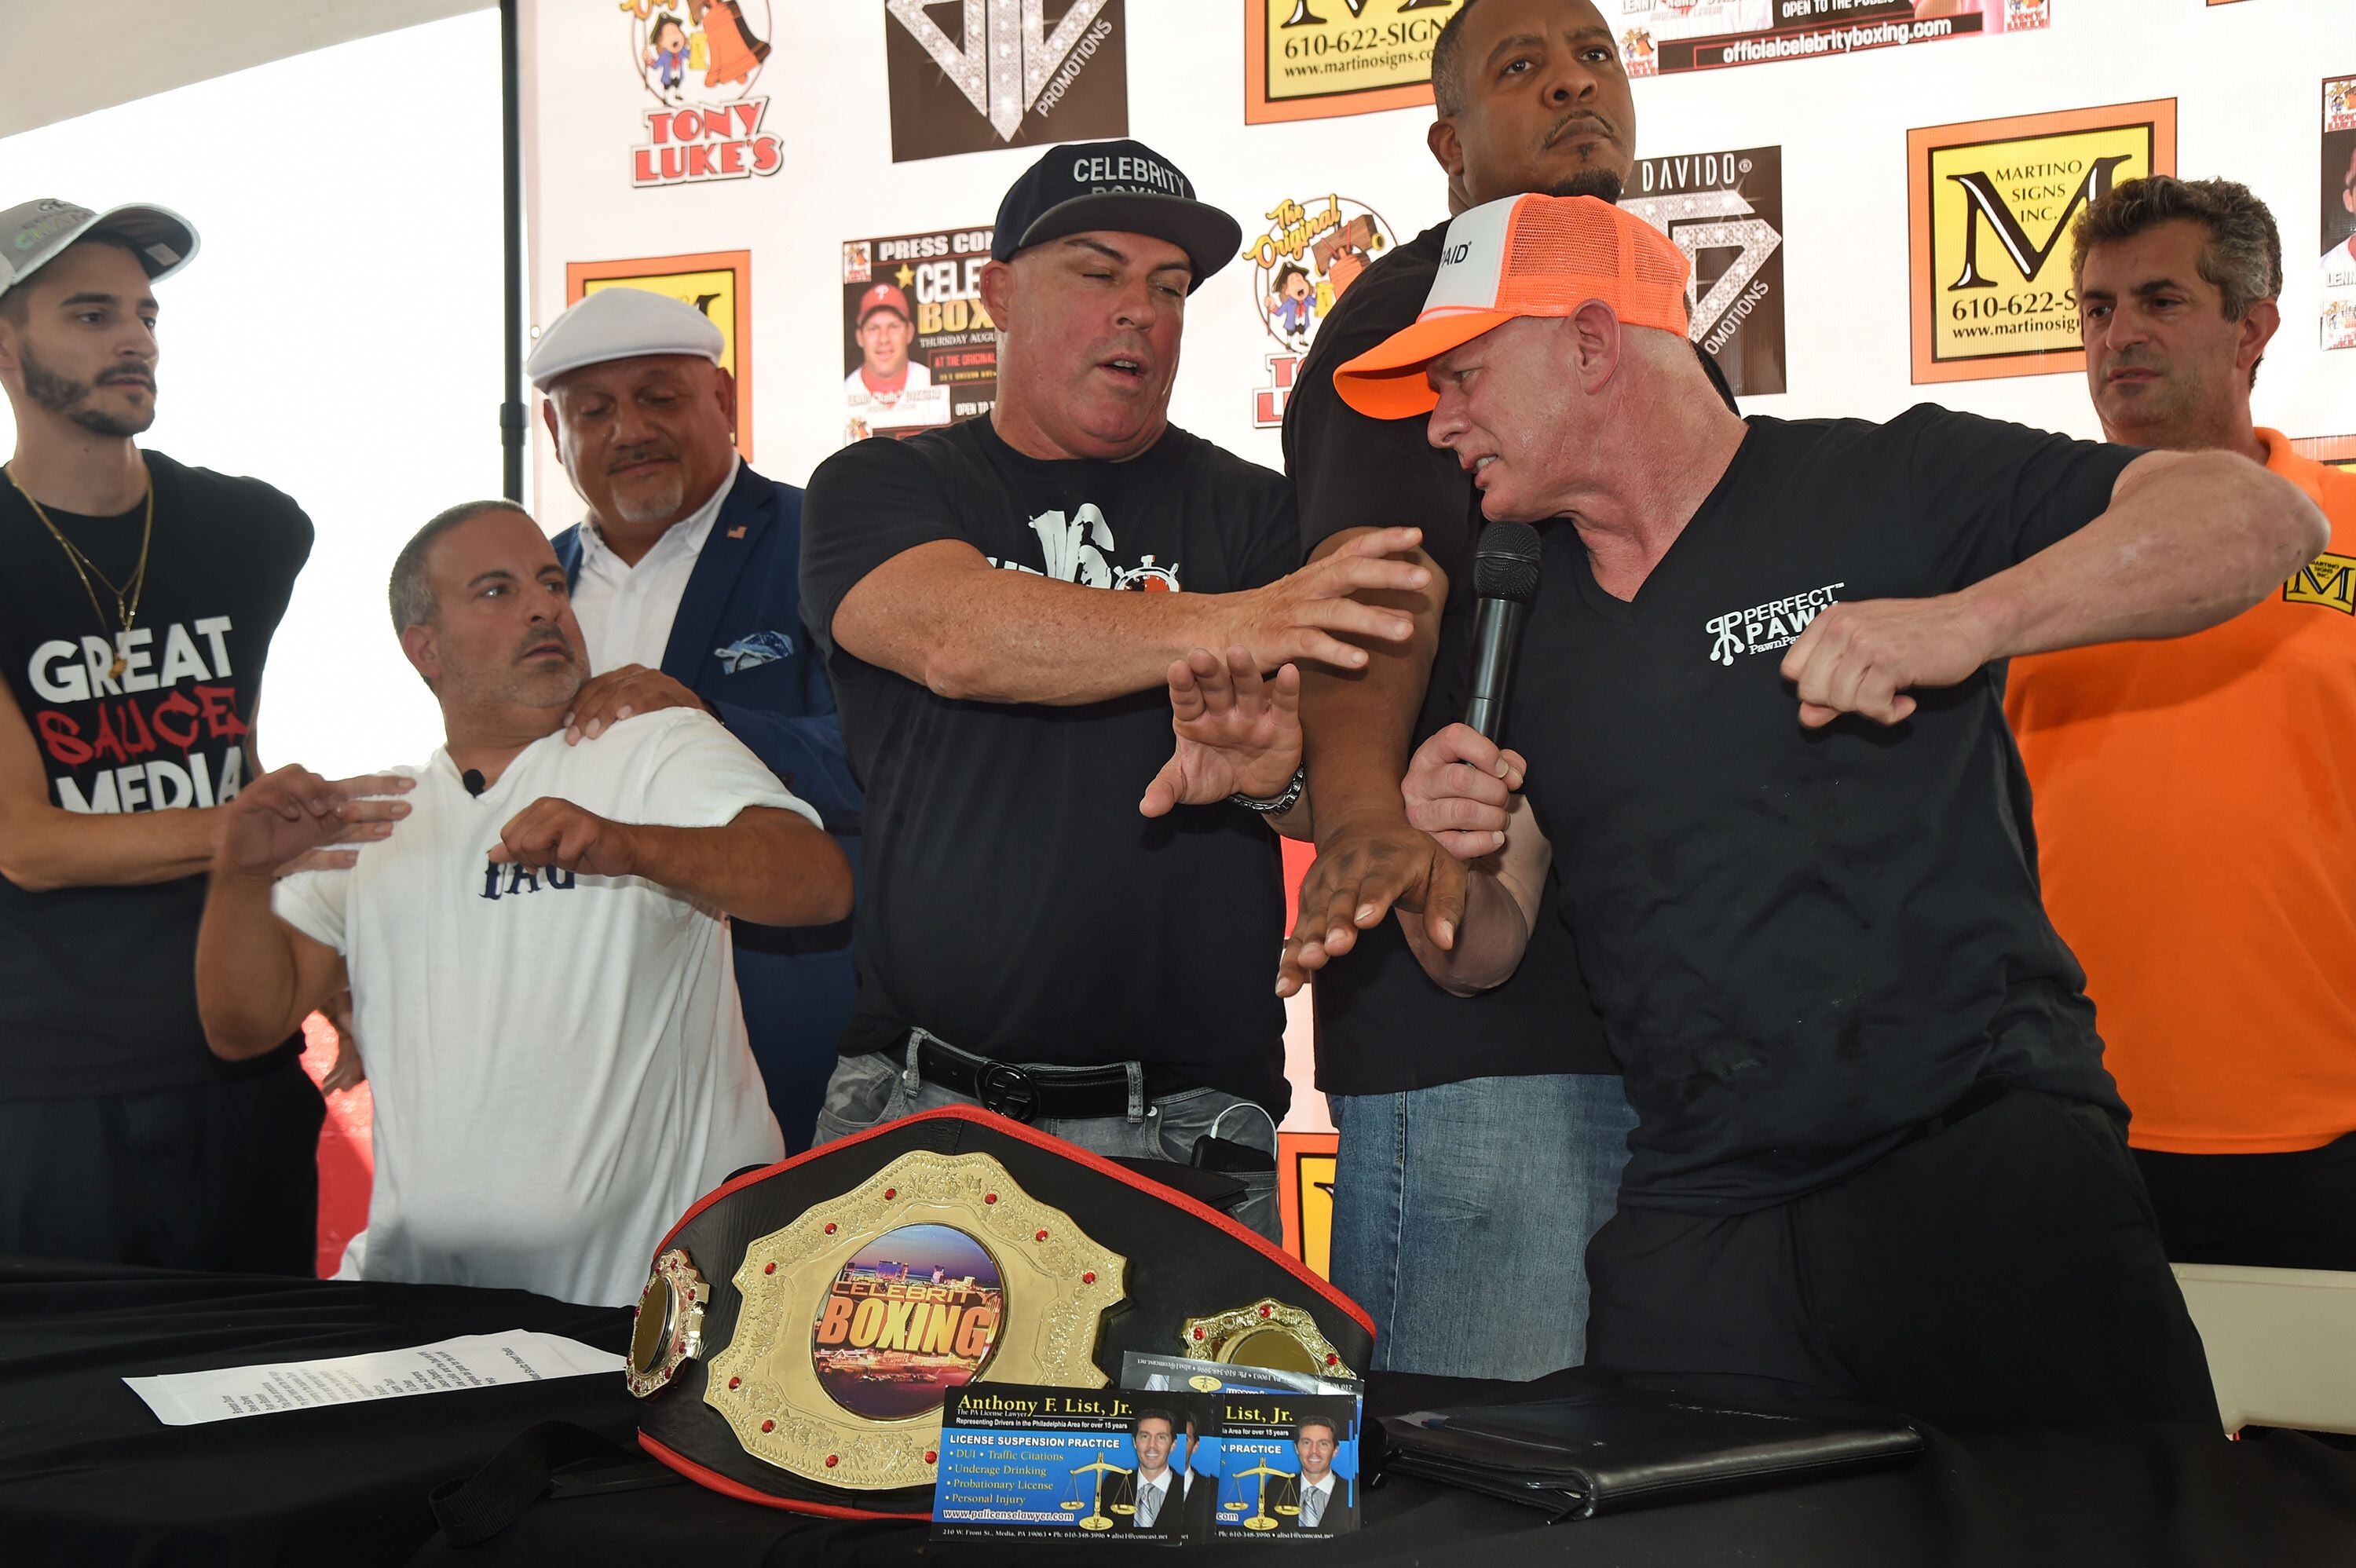 LINDEN, NJ - AUGUST 9 : Lenny Dykstra pictured with Celebrity Boxing  promoter Damon Feldman at Dykstra'a home in Linden, NJ, signing the  contract to fight The Bagel Boss guy on September